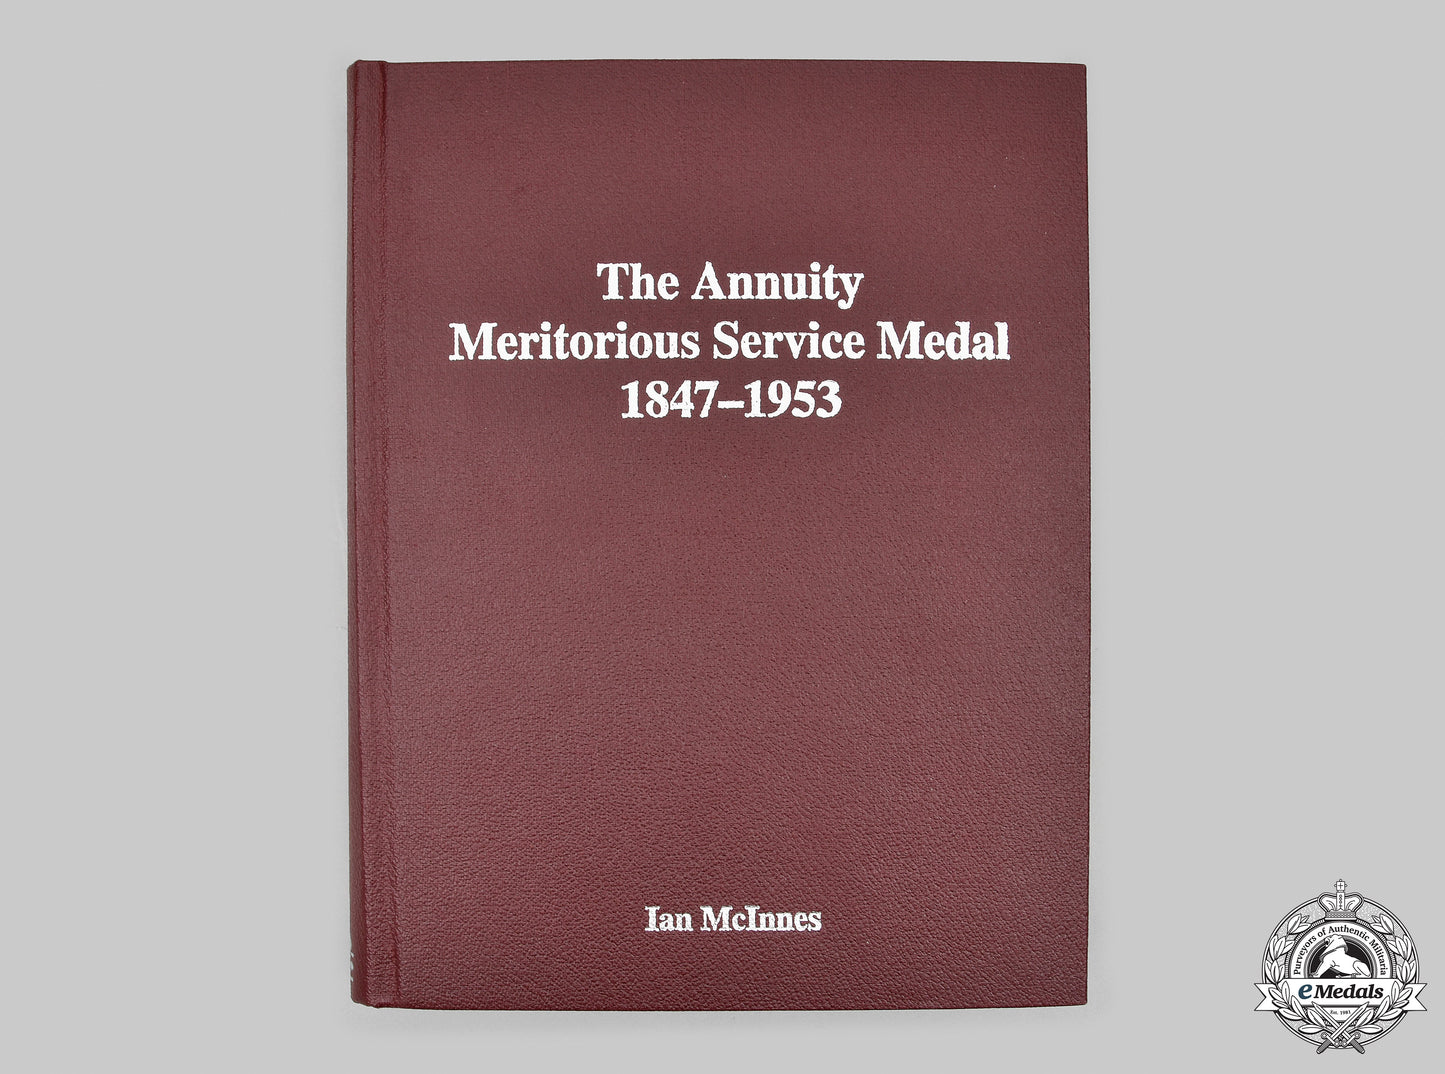 united_kingdom._the_annuity_meritorious_service_medal1847-1953_m21_0097_mnc5761